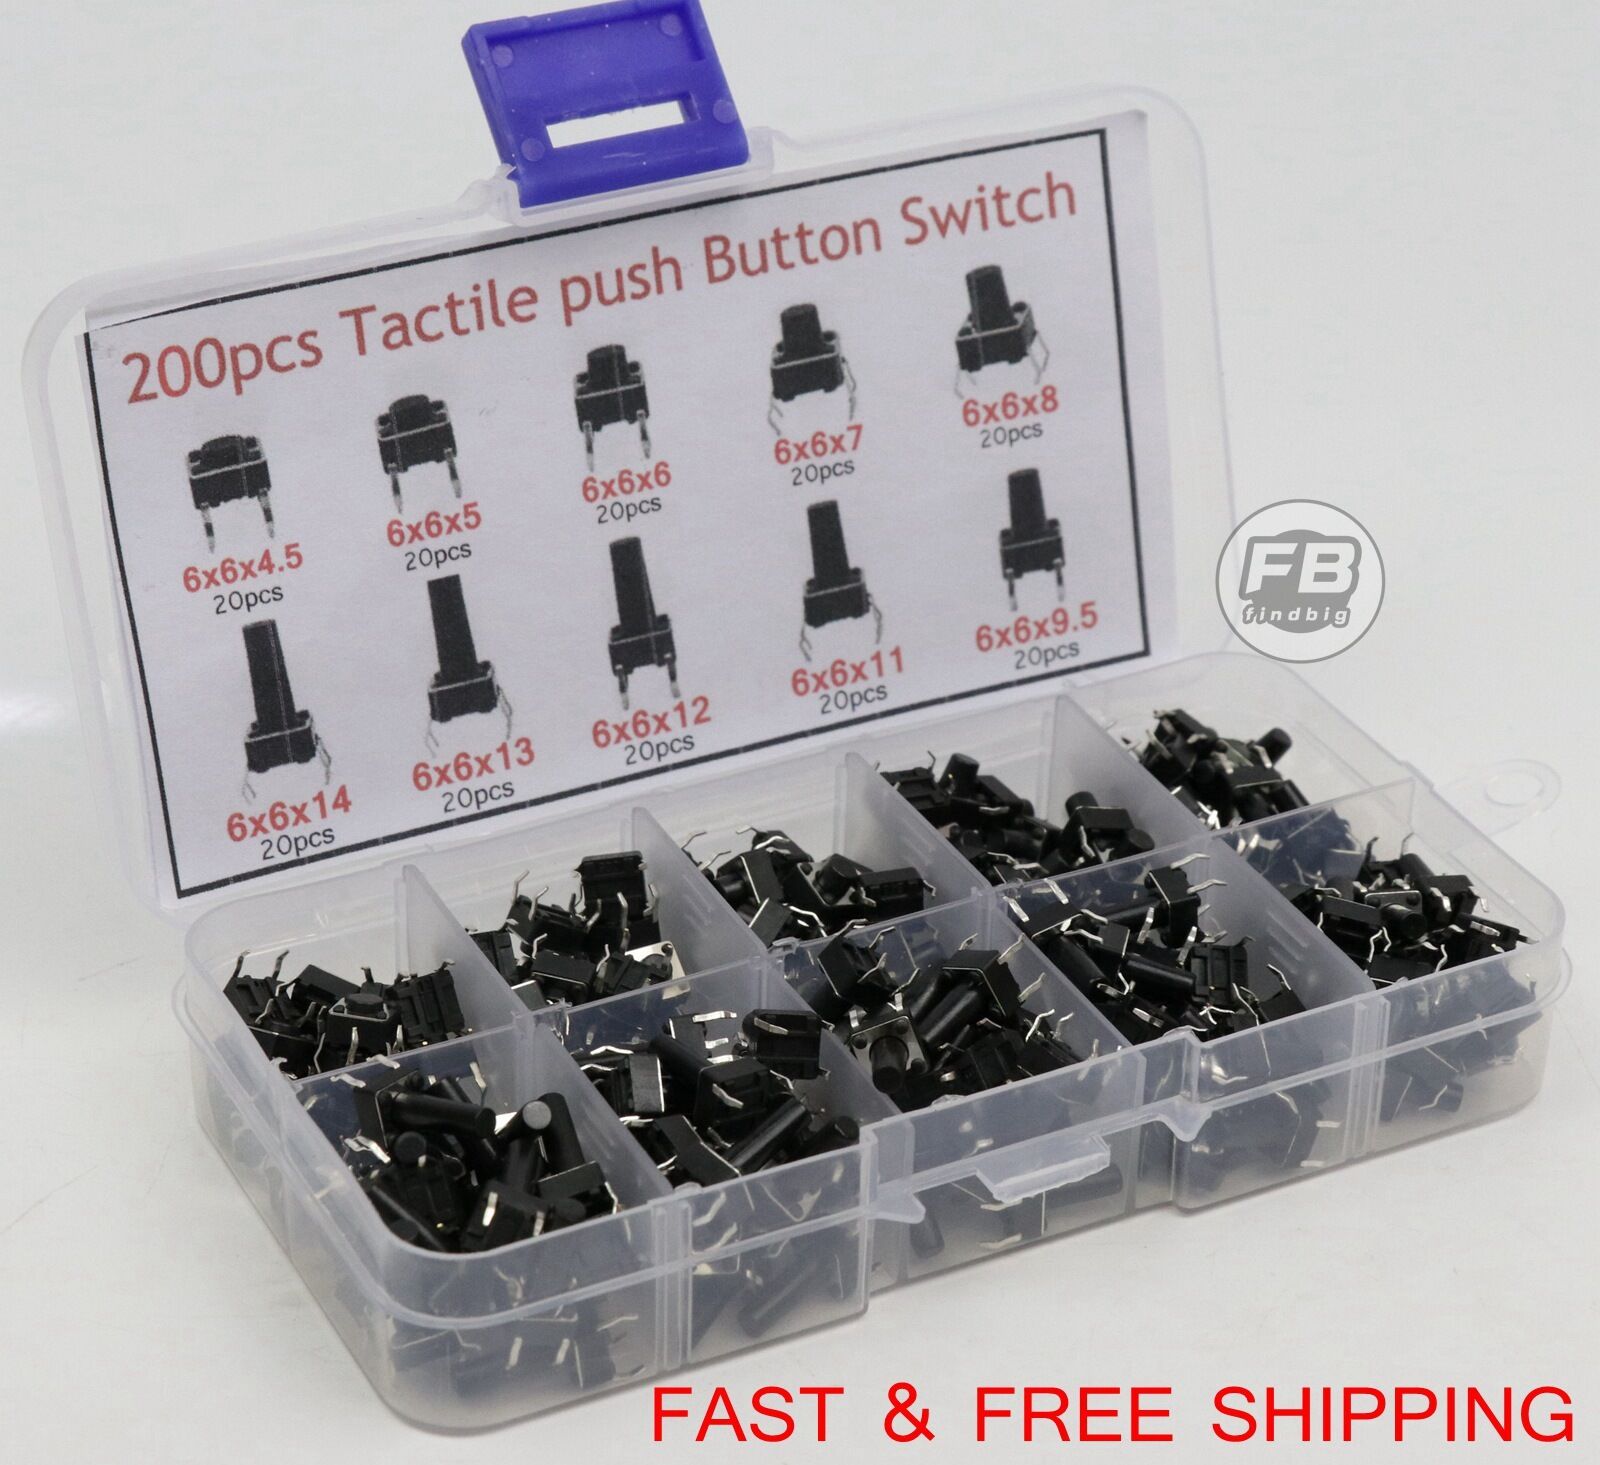 Tactile Micro Momentary Push Button Switch 10 Value Tact Assortment 200PCS findbig CP.QM.989-A + CP.QM.989-0